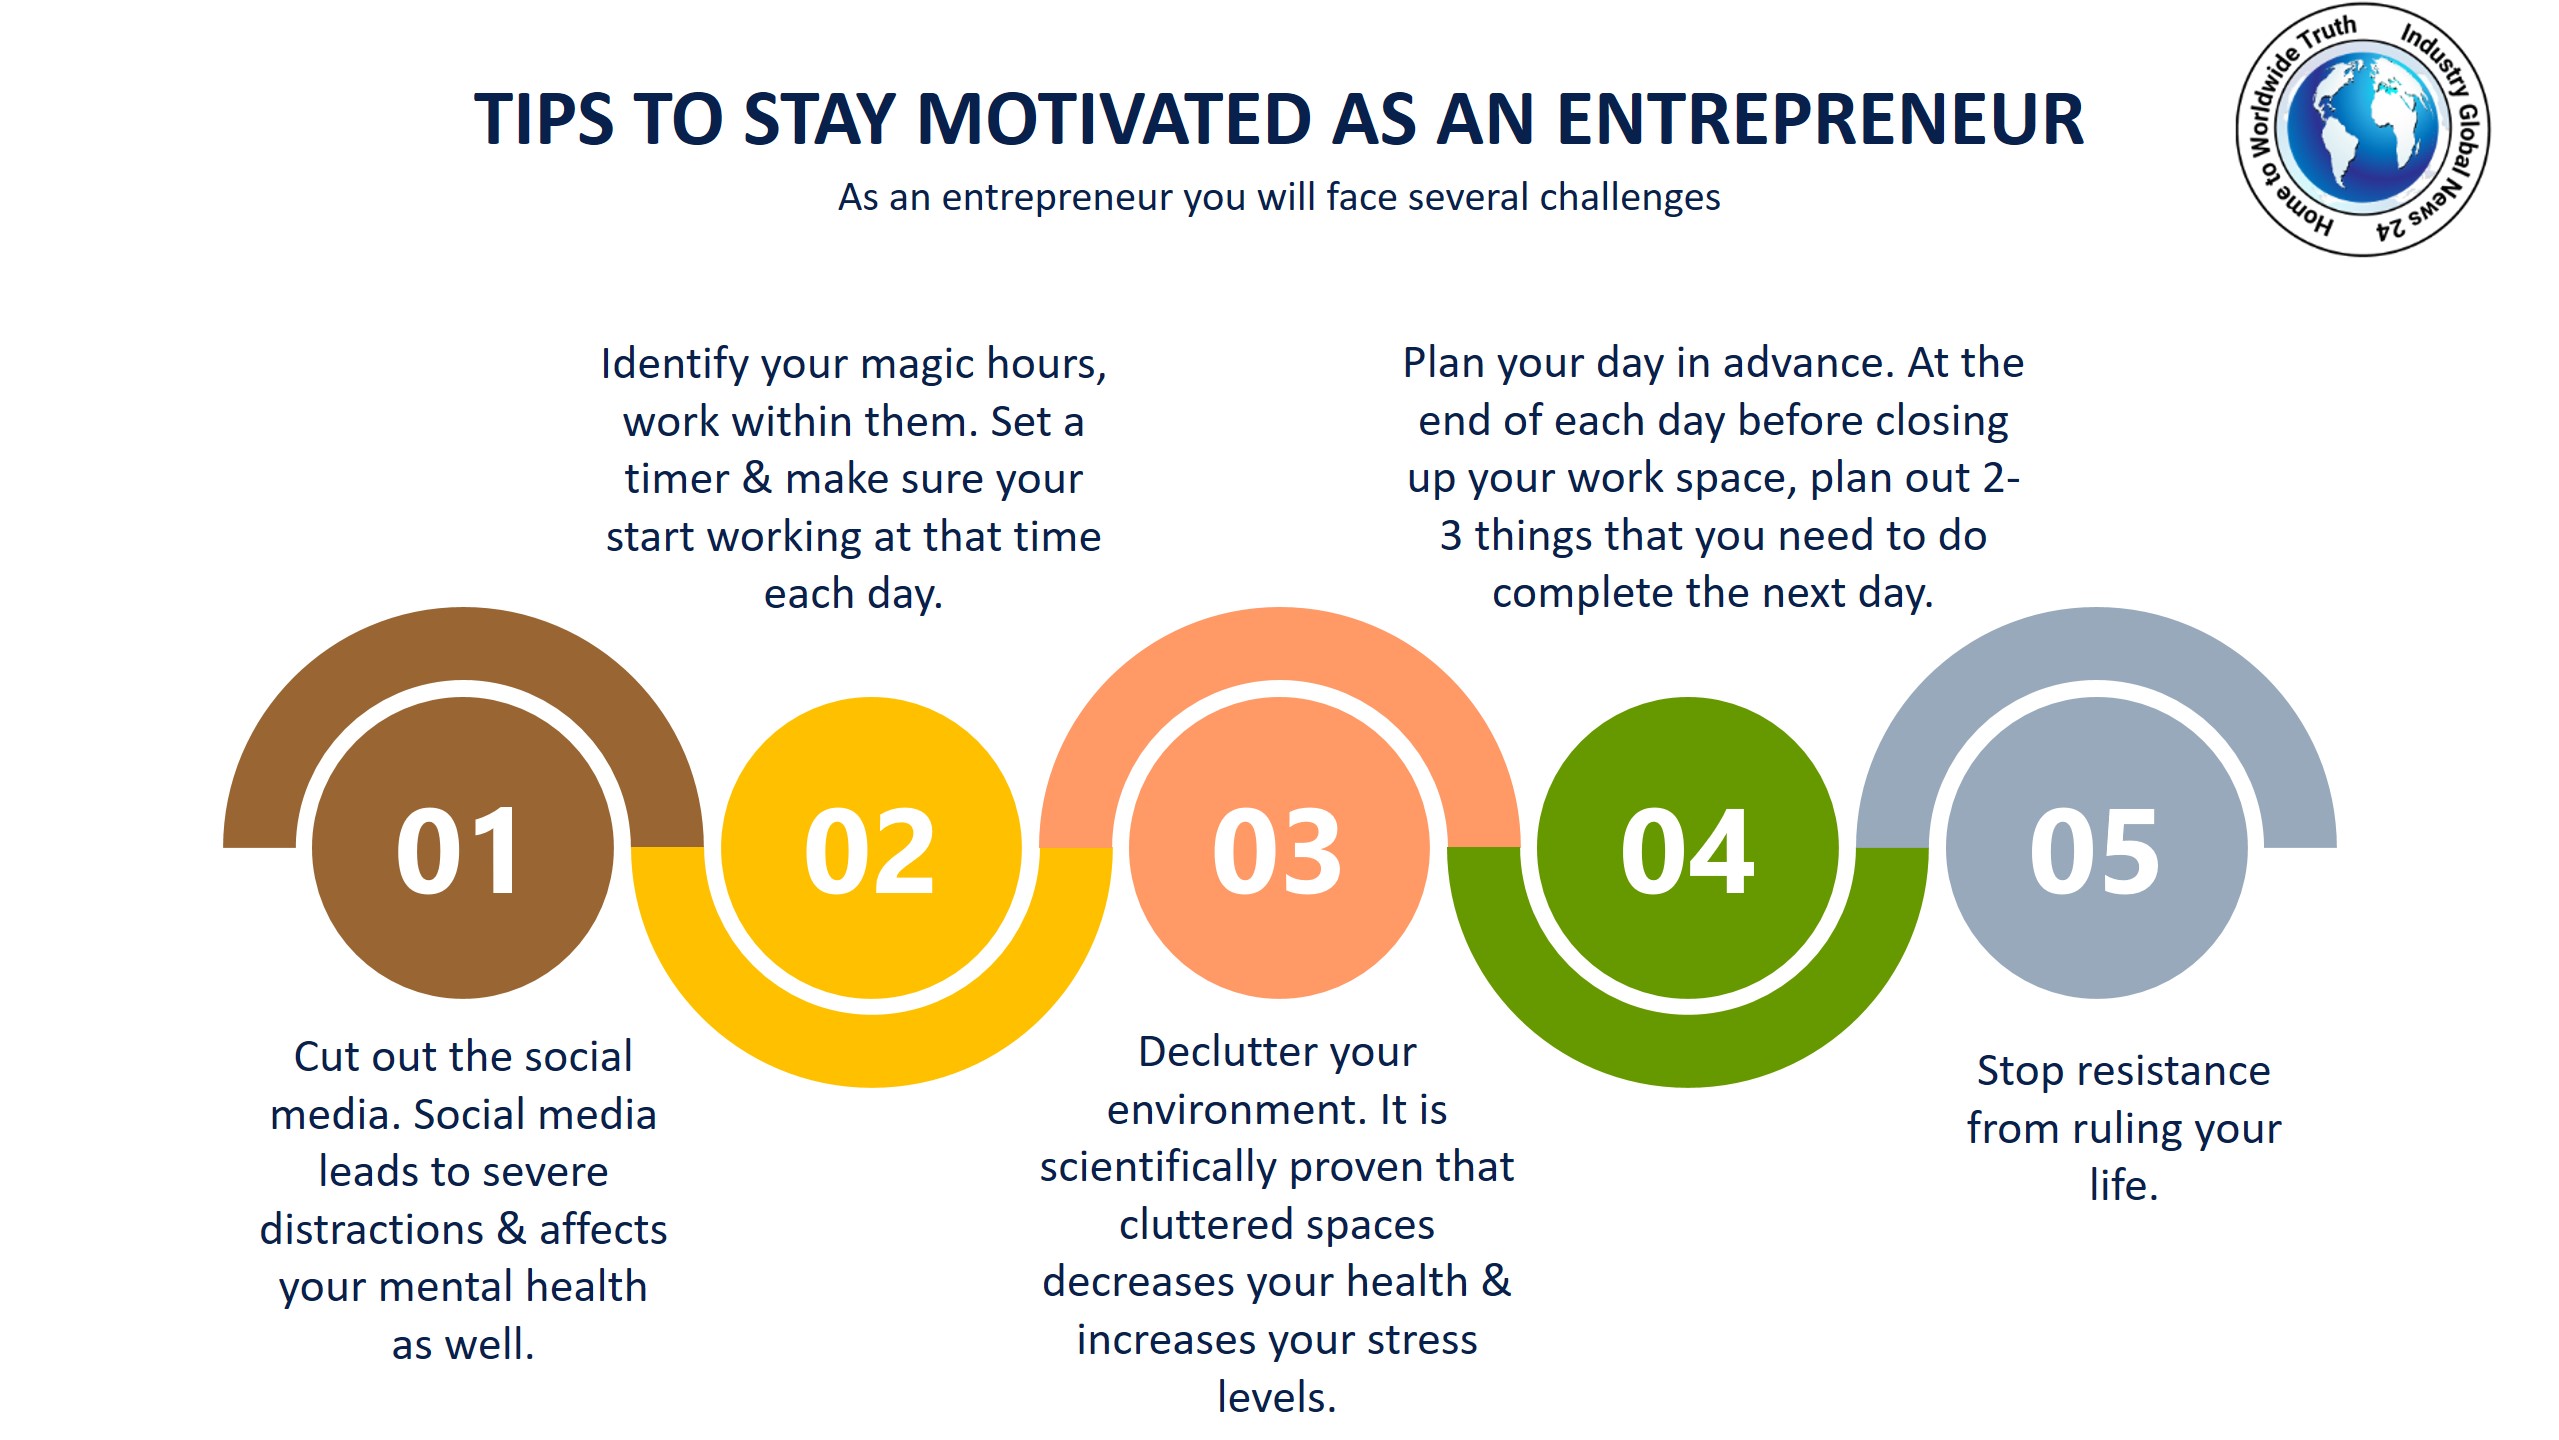 Tips to stay motivated as an entrepreneur